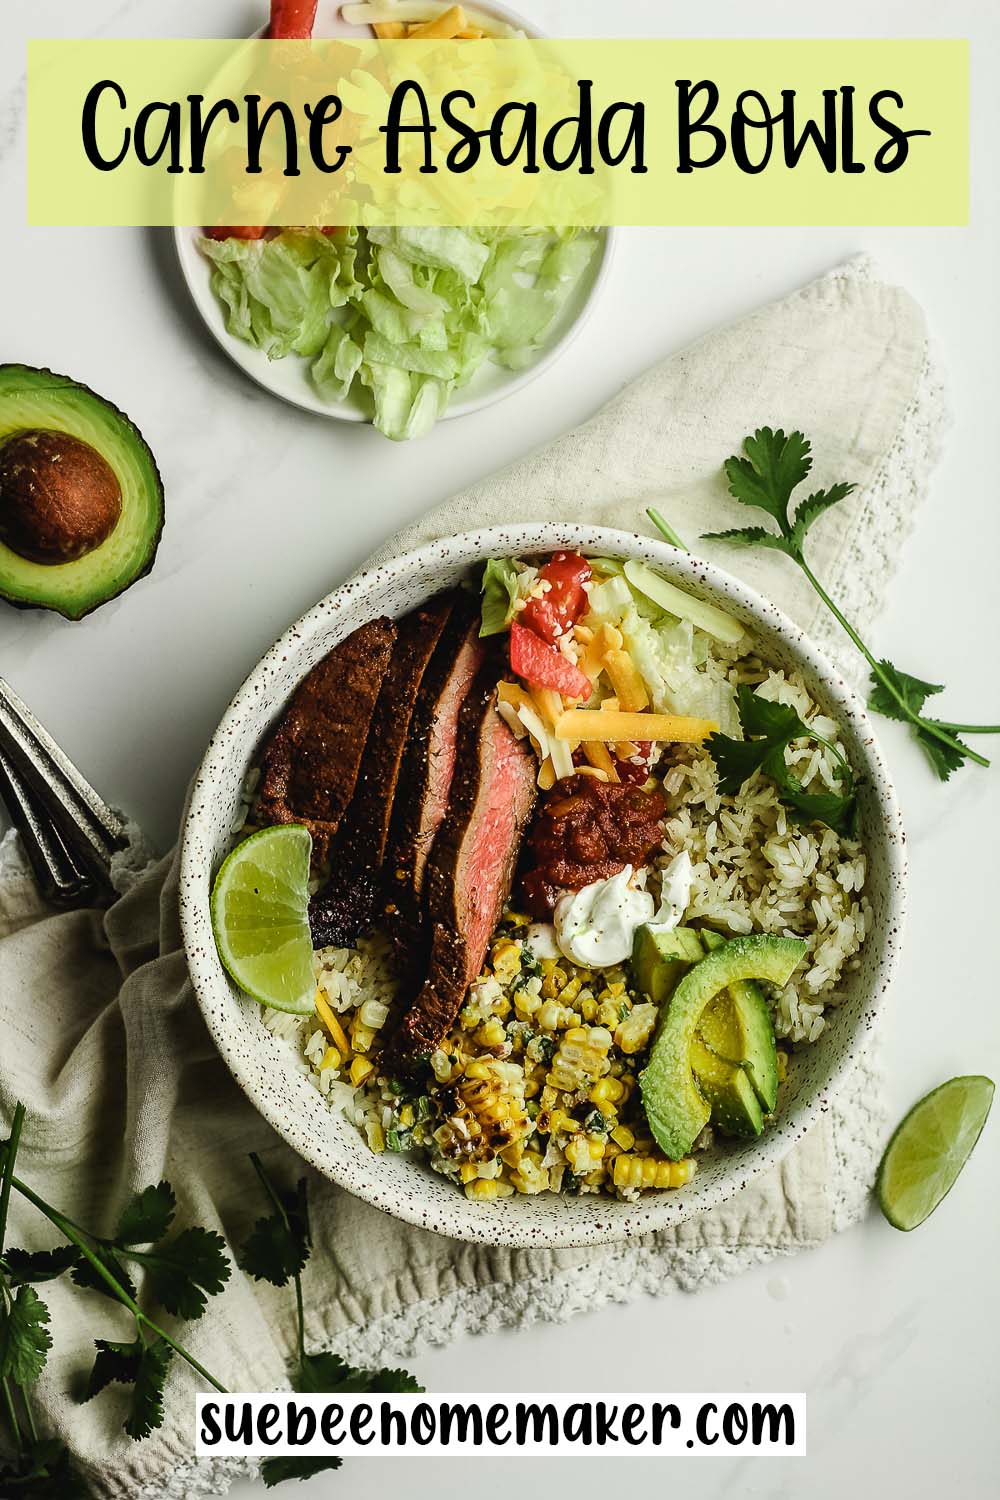 Overhead view of a carne asada bowl with rice and street corn.